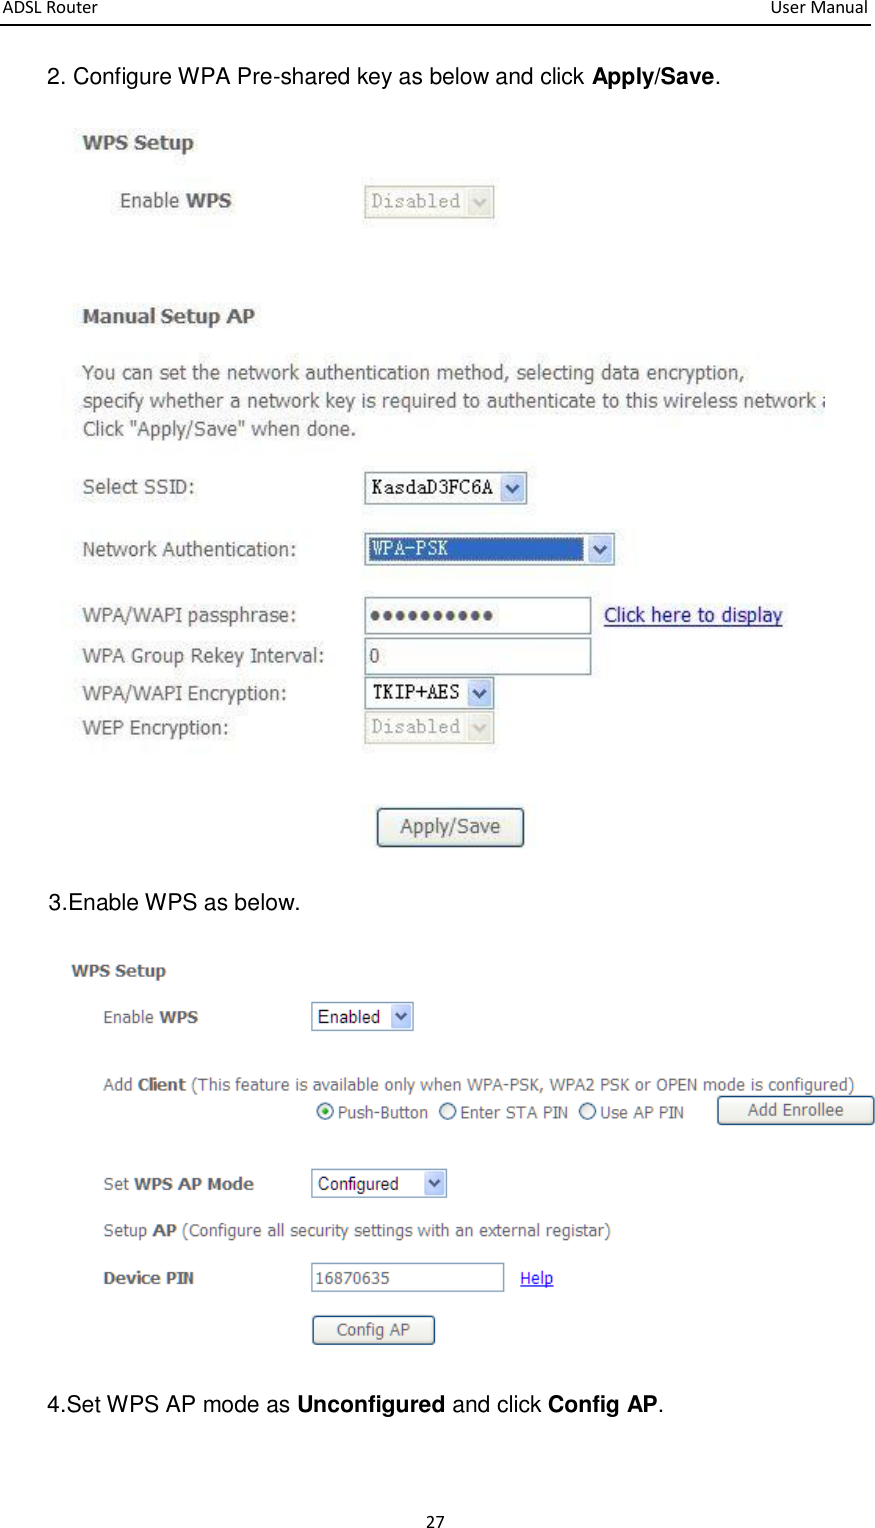 ADSL Router       User Manual 27 2. Configure WPA Pre-shared key as below and click Apply/Save.  3.Enable WPS as below.  4.Set WPS AP mode as Unconfigured and click Config AP. 